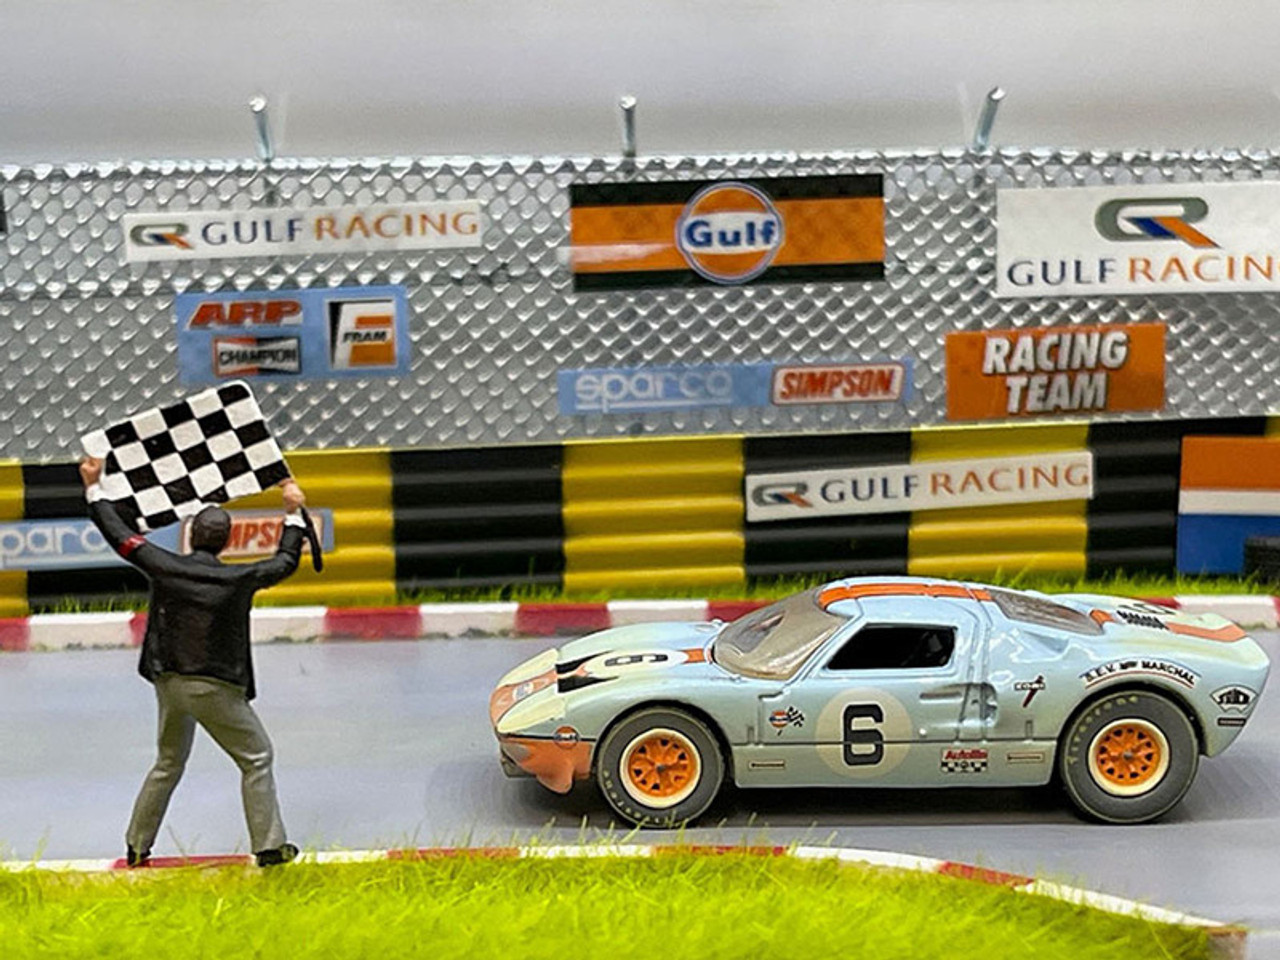 1965 Ford GT40 #6 Light Blue with Orange Stripe (Race Worn Version) "Gulf Oil" with Flag Man Figure Limited Edition to 4800 pieces Worldwide 1/64 Diecast Model Car by Auto World